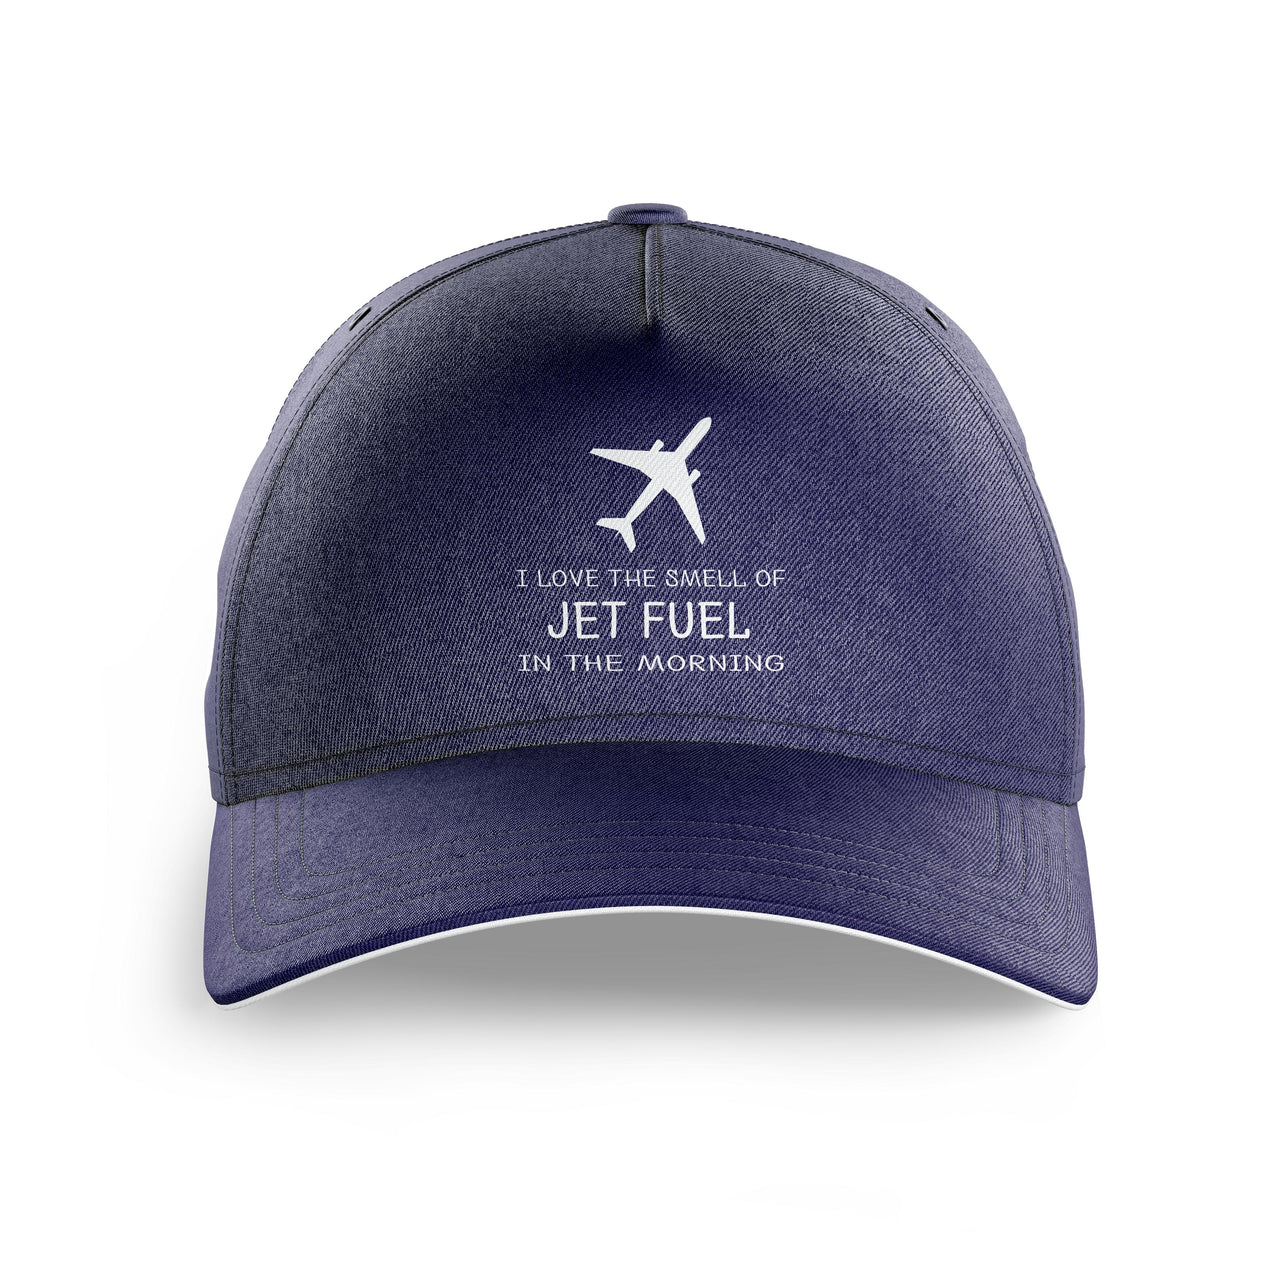 I Love The Smell Of Jet Fuel In The Morning Printed Hats